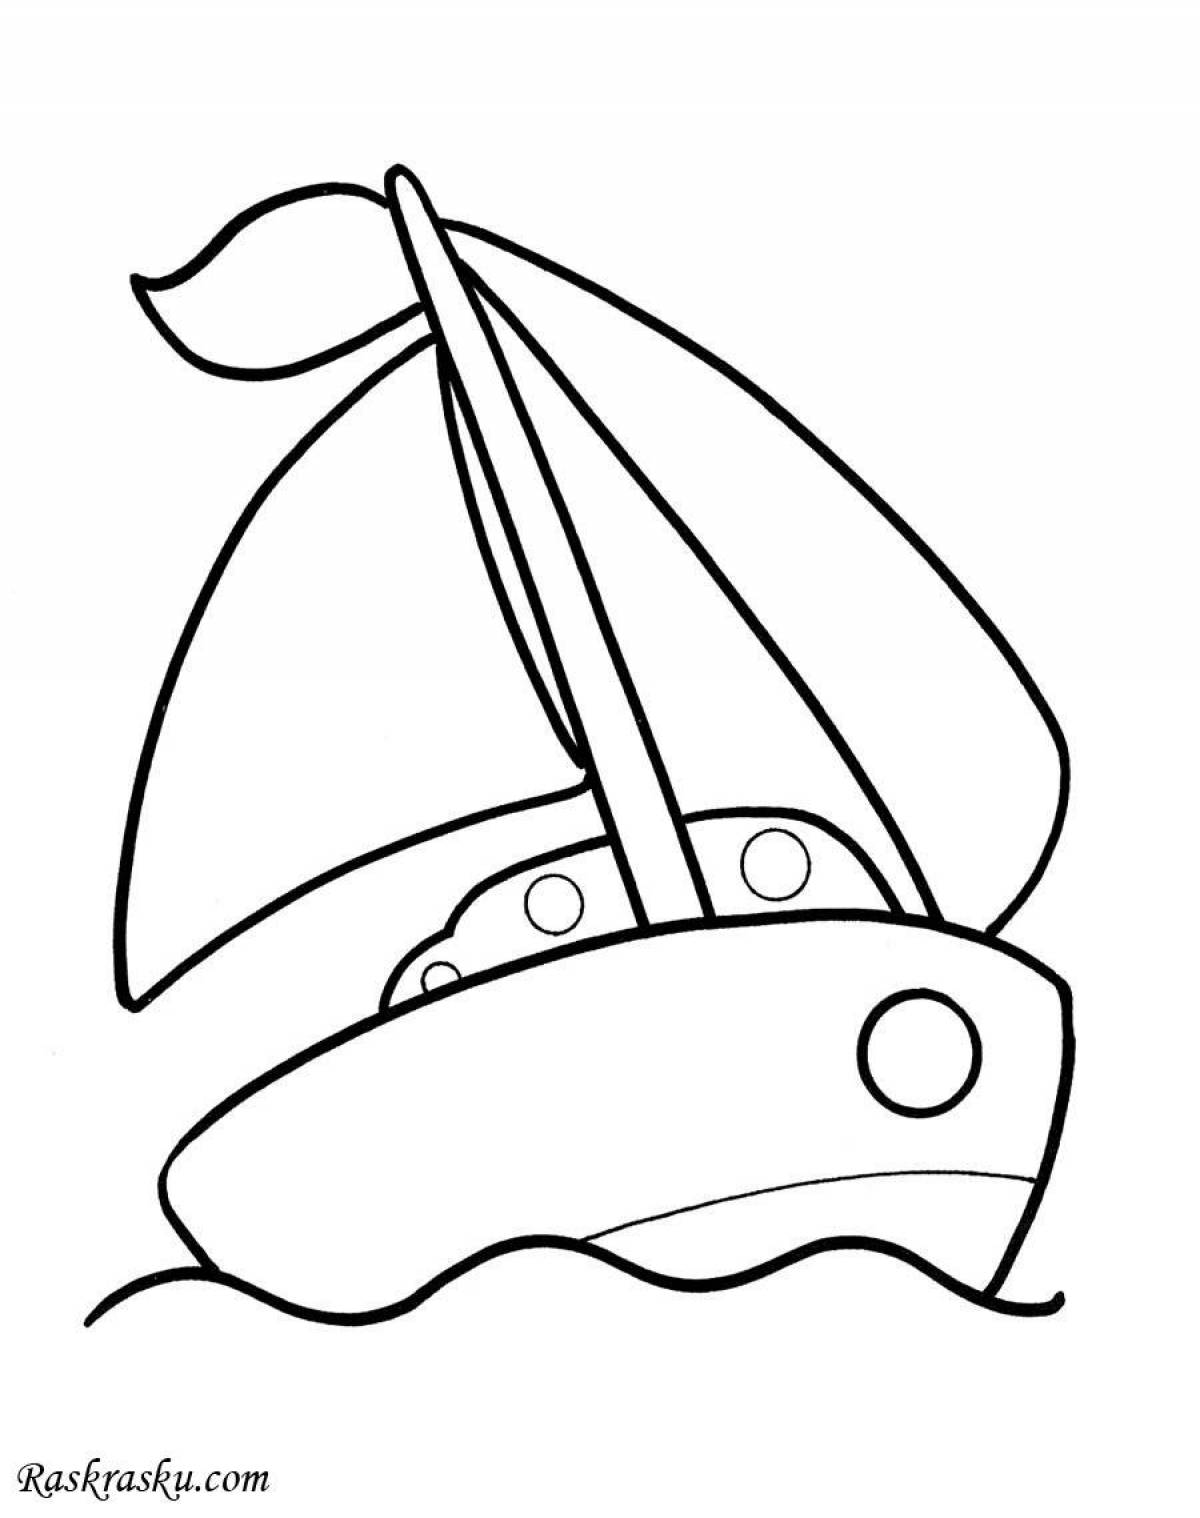 Sublime boat coloring page